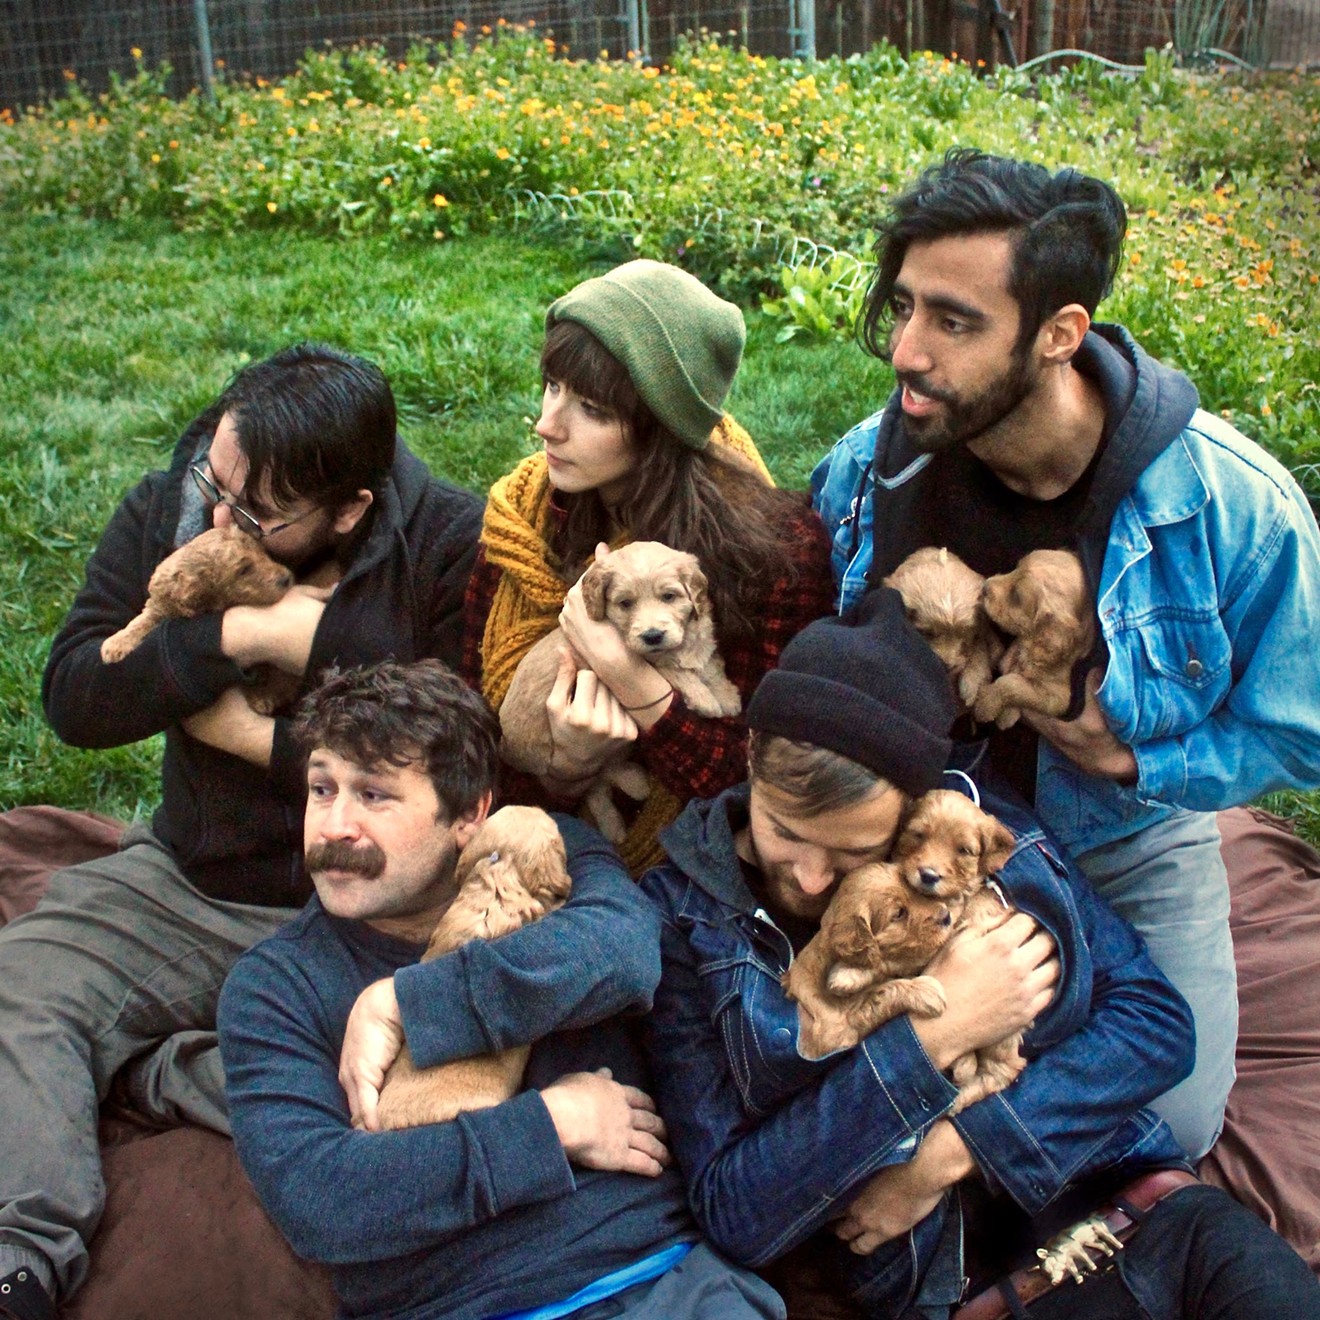 Denver indie-rock quintet Knuckle Pups snuggled up with, well, pups.